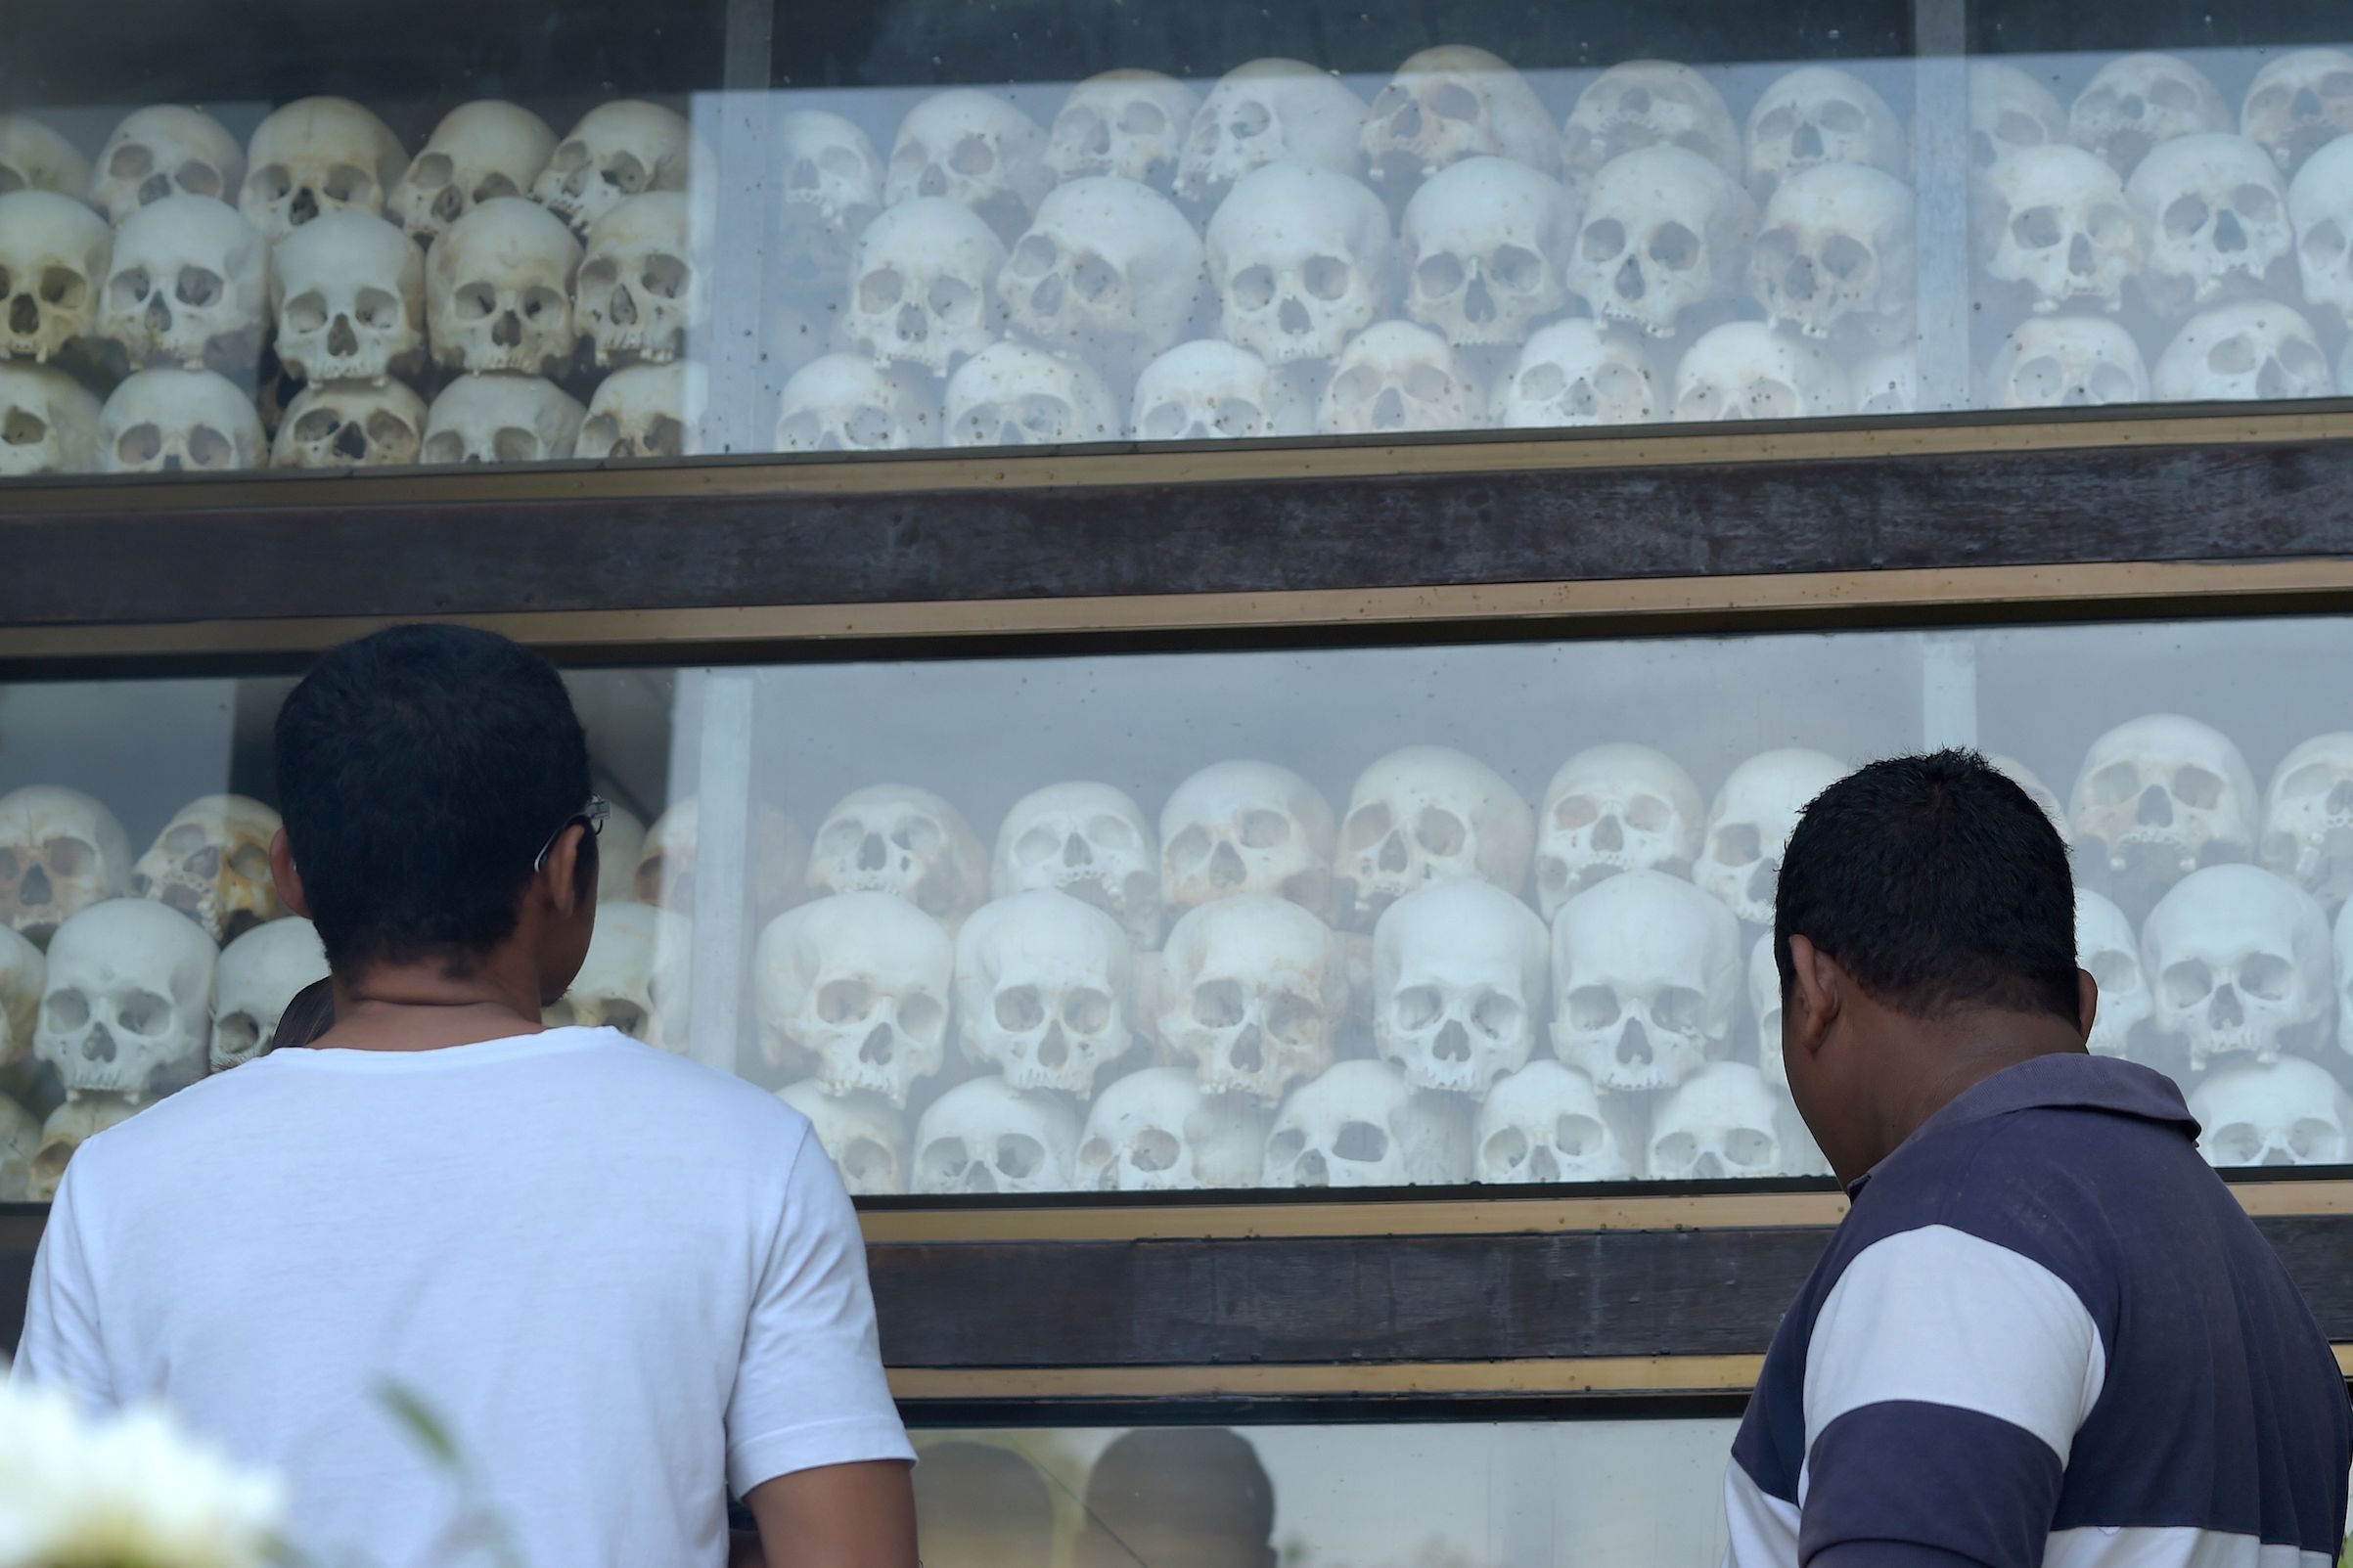 People look at skulls at the Choeung Ek memorial in Phnom Penh on May 20, 2018, as Cambodians observed the annual remembrance day (TANG CHHIN SOTHY&mdash;AFP/Getty Images)